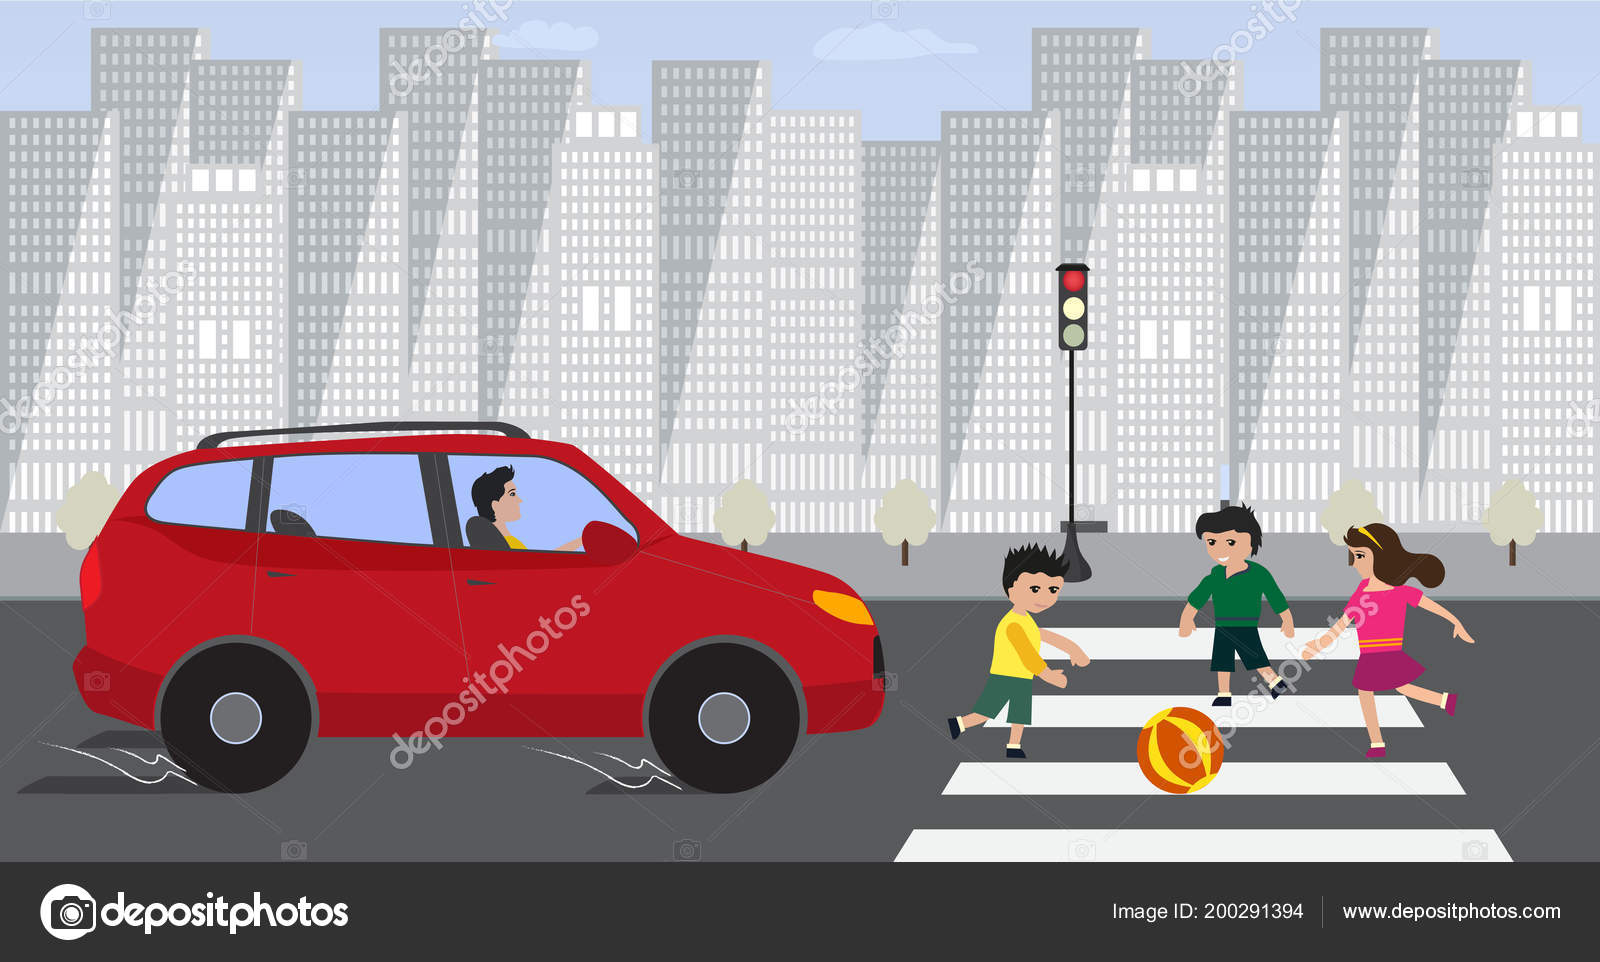 Little boy playing ball on road kid in dangerous Vector Image